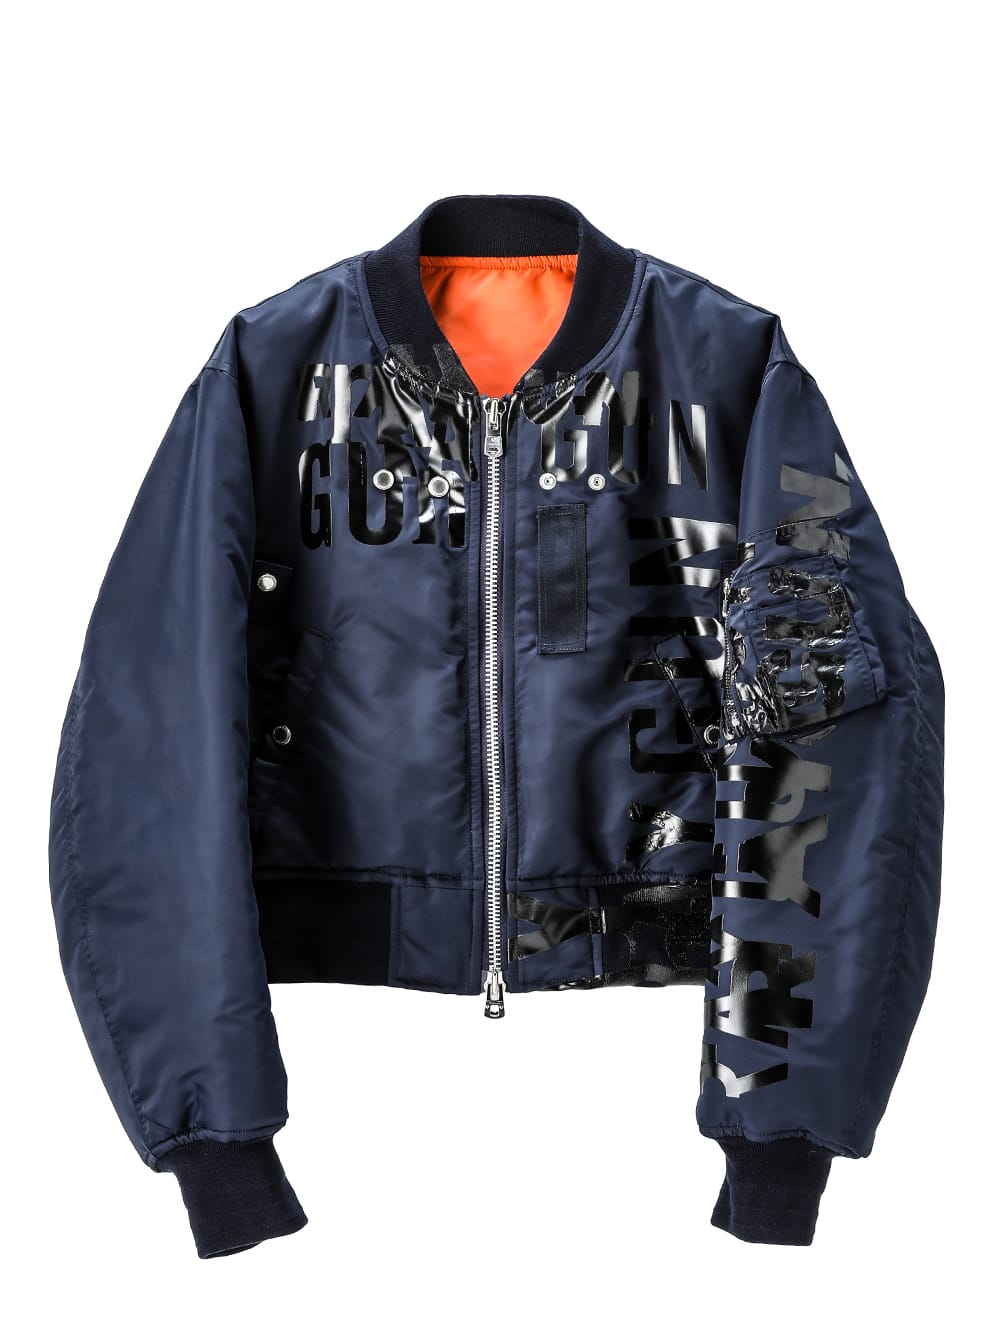 sj.0018aAW23-midnight two-way cropped bomber jacket. THE TWO OF US 